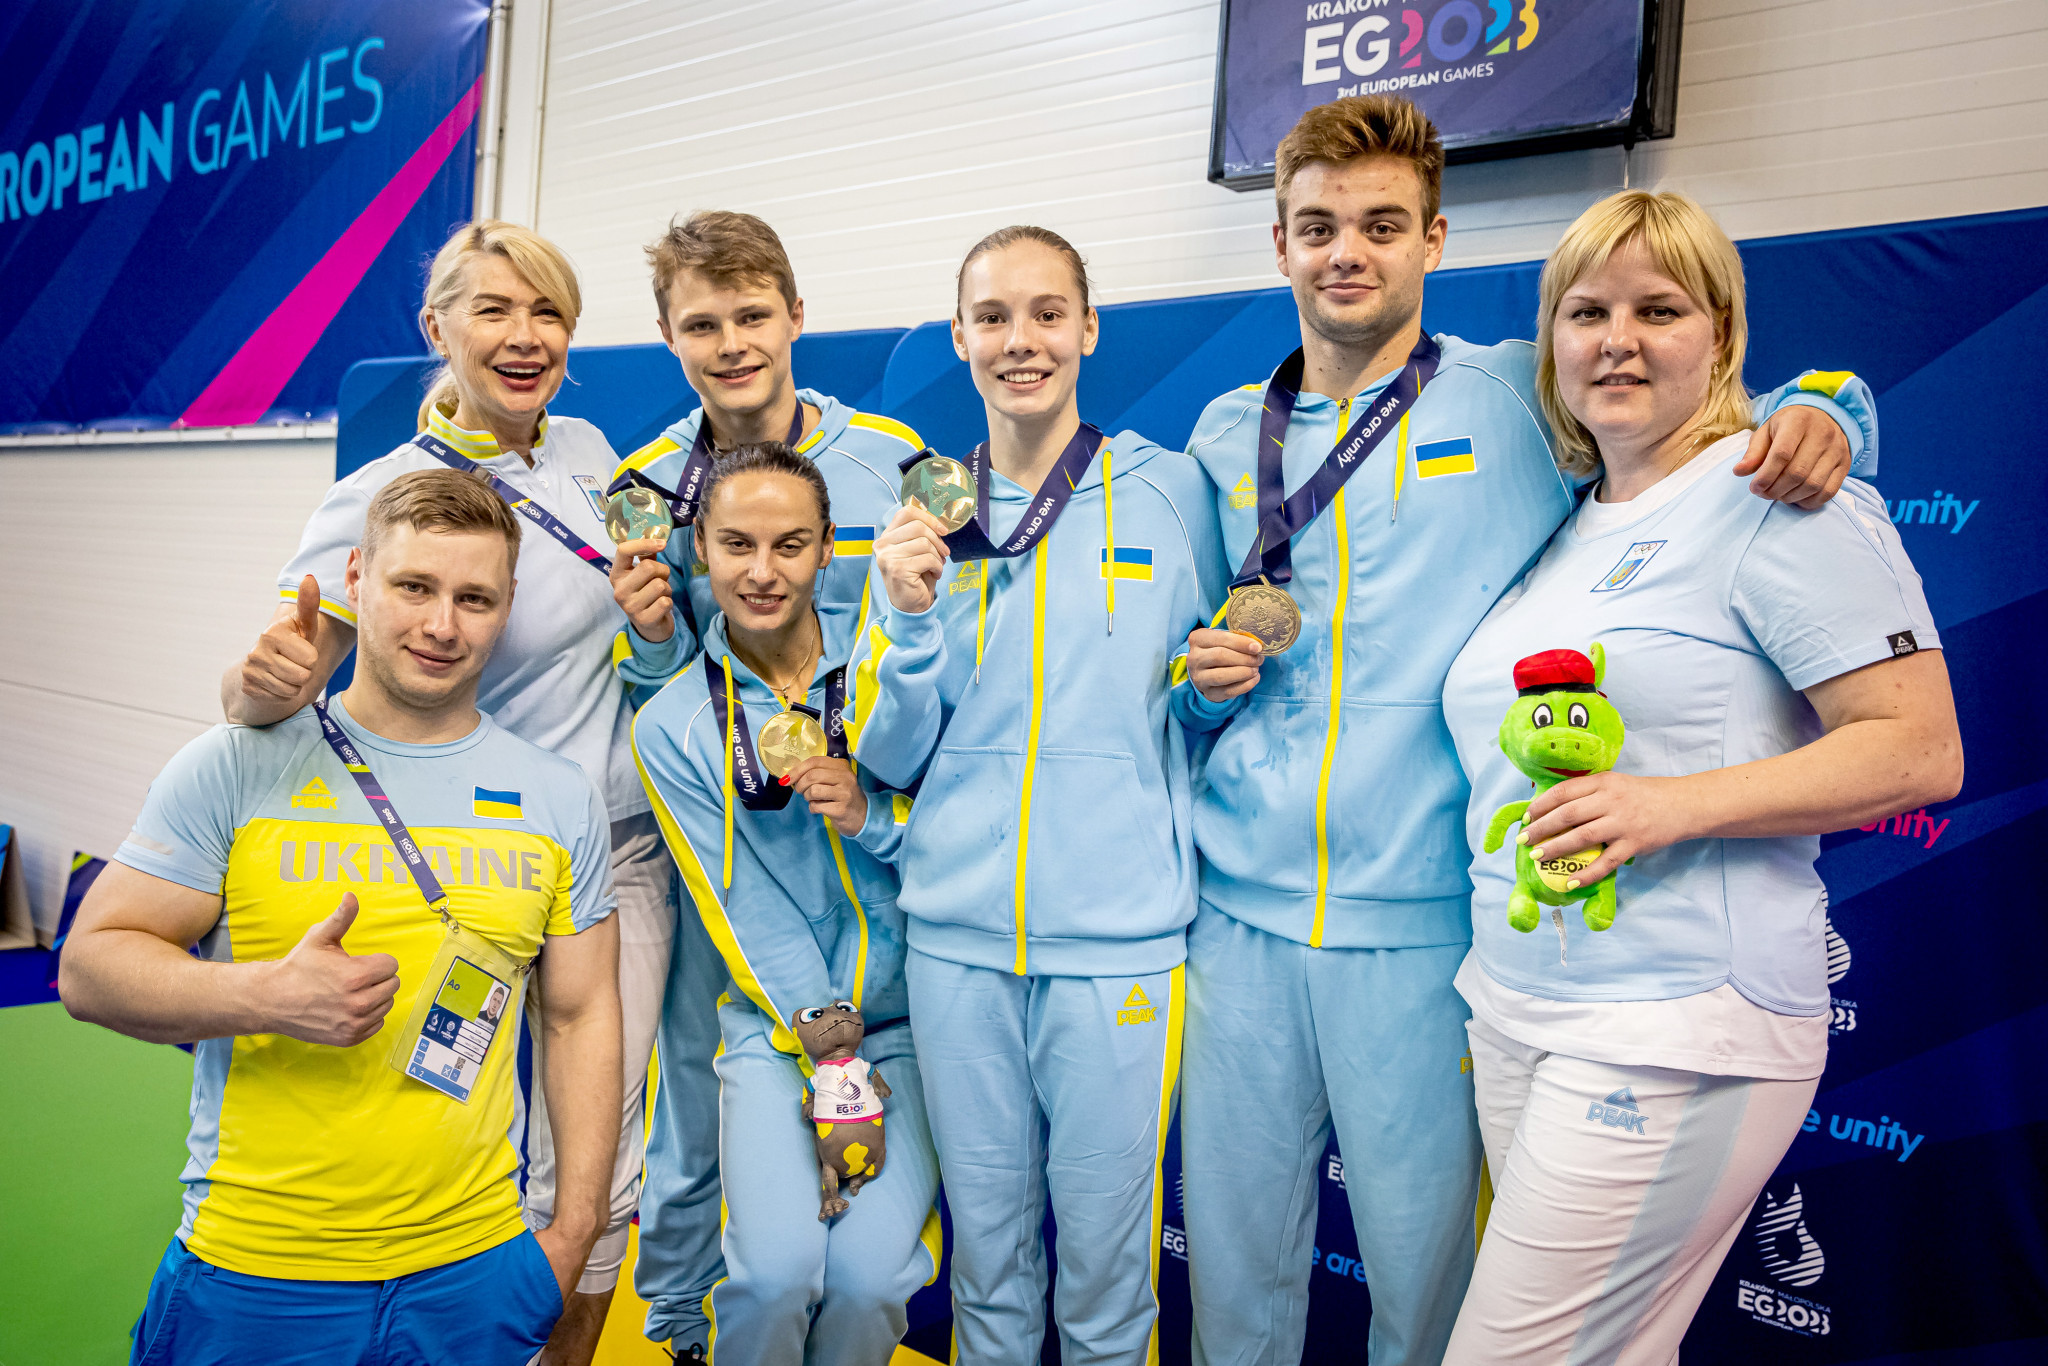 Ukraine were the other winners in the day's aquatics events, triumphing in the mixed team 3m/10m diving ©Kraków-Małopolska 2023